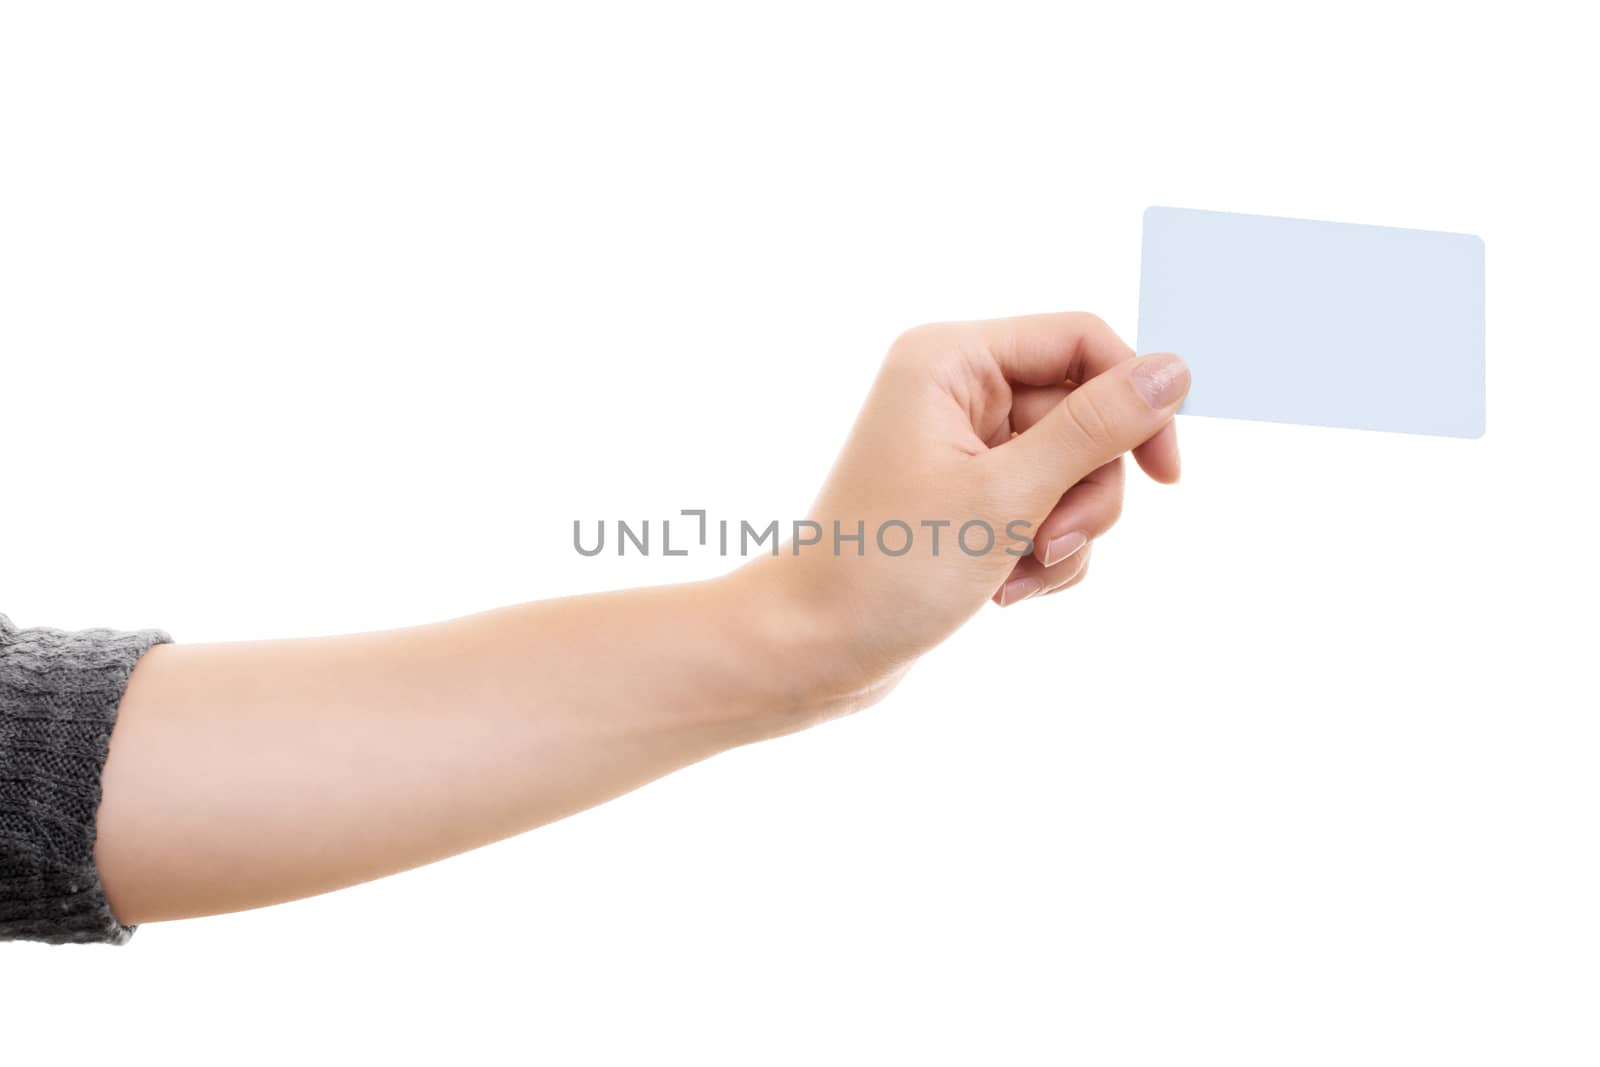 Female hand holding a blank white card mock up, isolated on white background. Business communication and advertising concept. Hand holding a plain call-card mock up template.